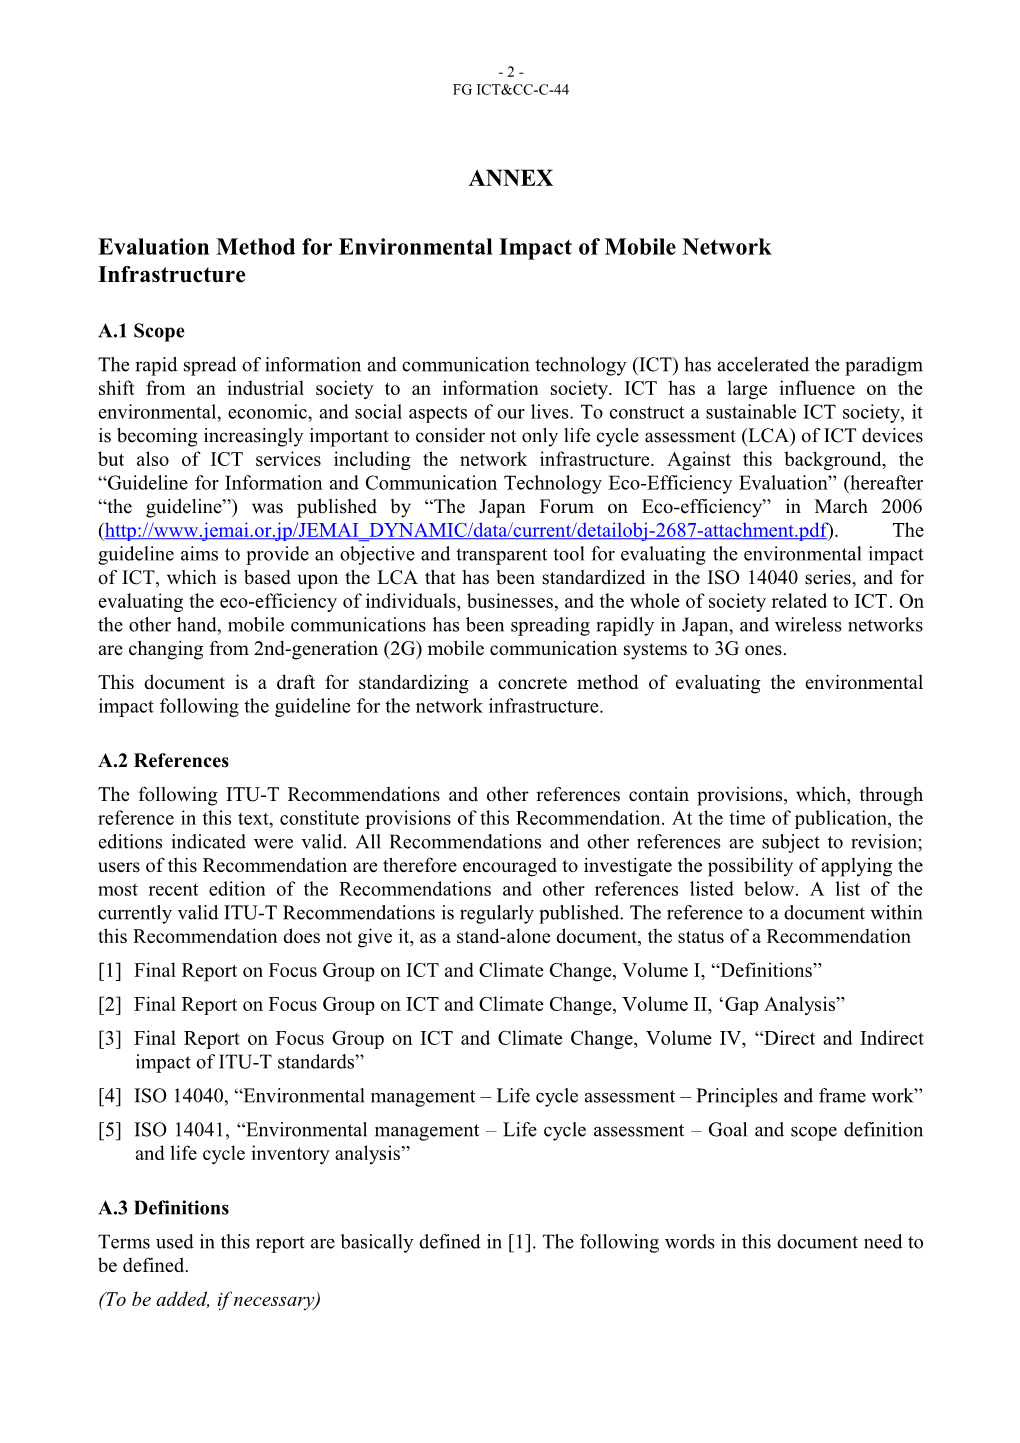 Proposed Evaluation Methods for Environmental Impact of Mobile Network Infrastructure Regarding